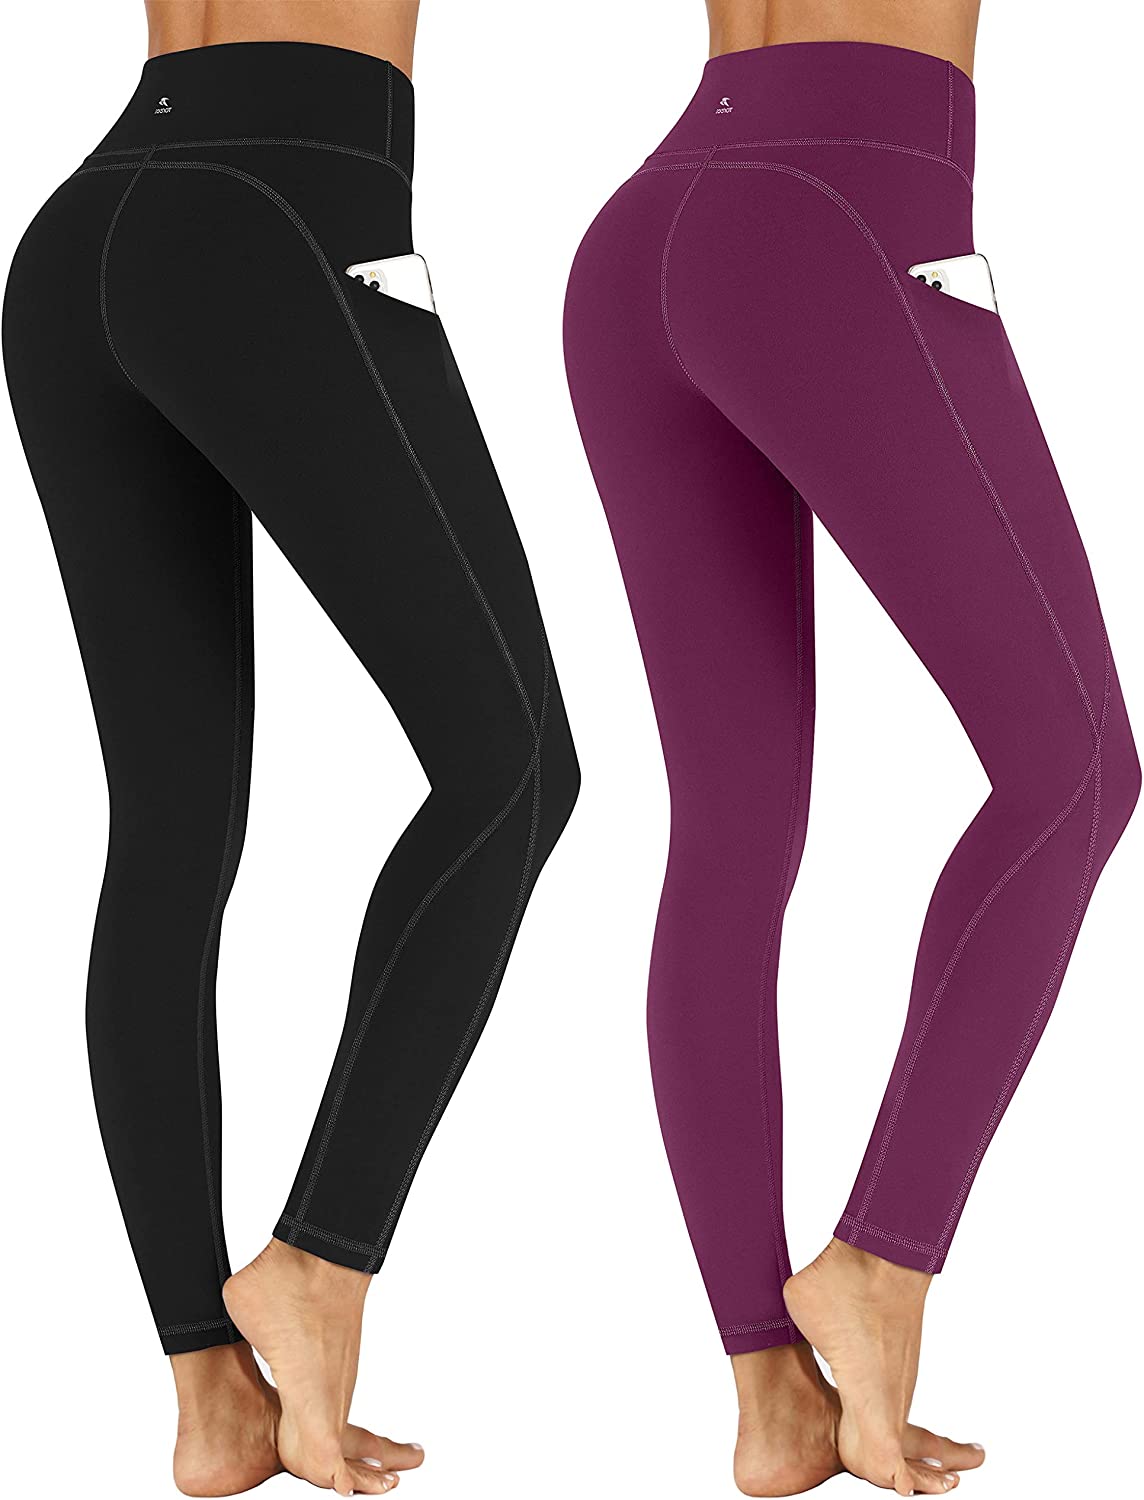 TOREEL High Waisted Leggings Pack Yoga Pants with Pockets for Women Tummy  Contro | eBay